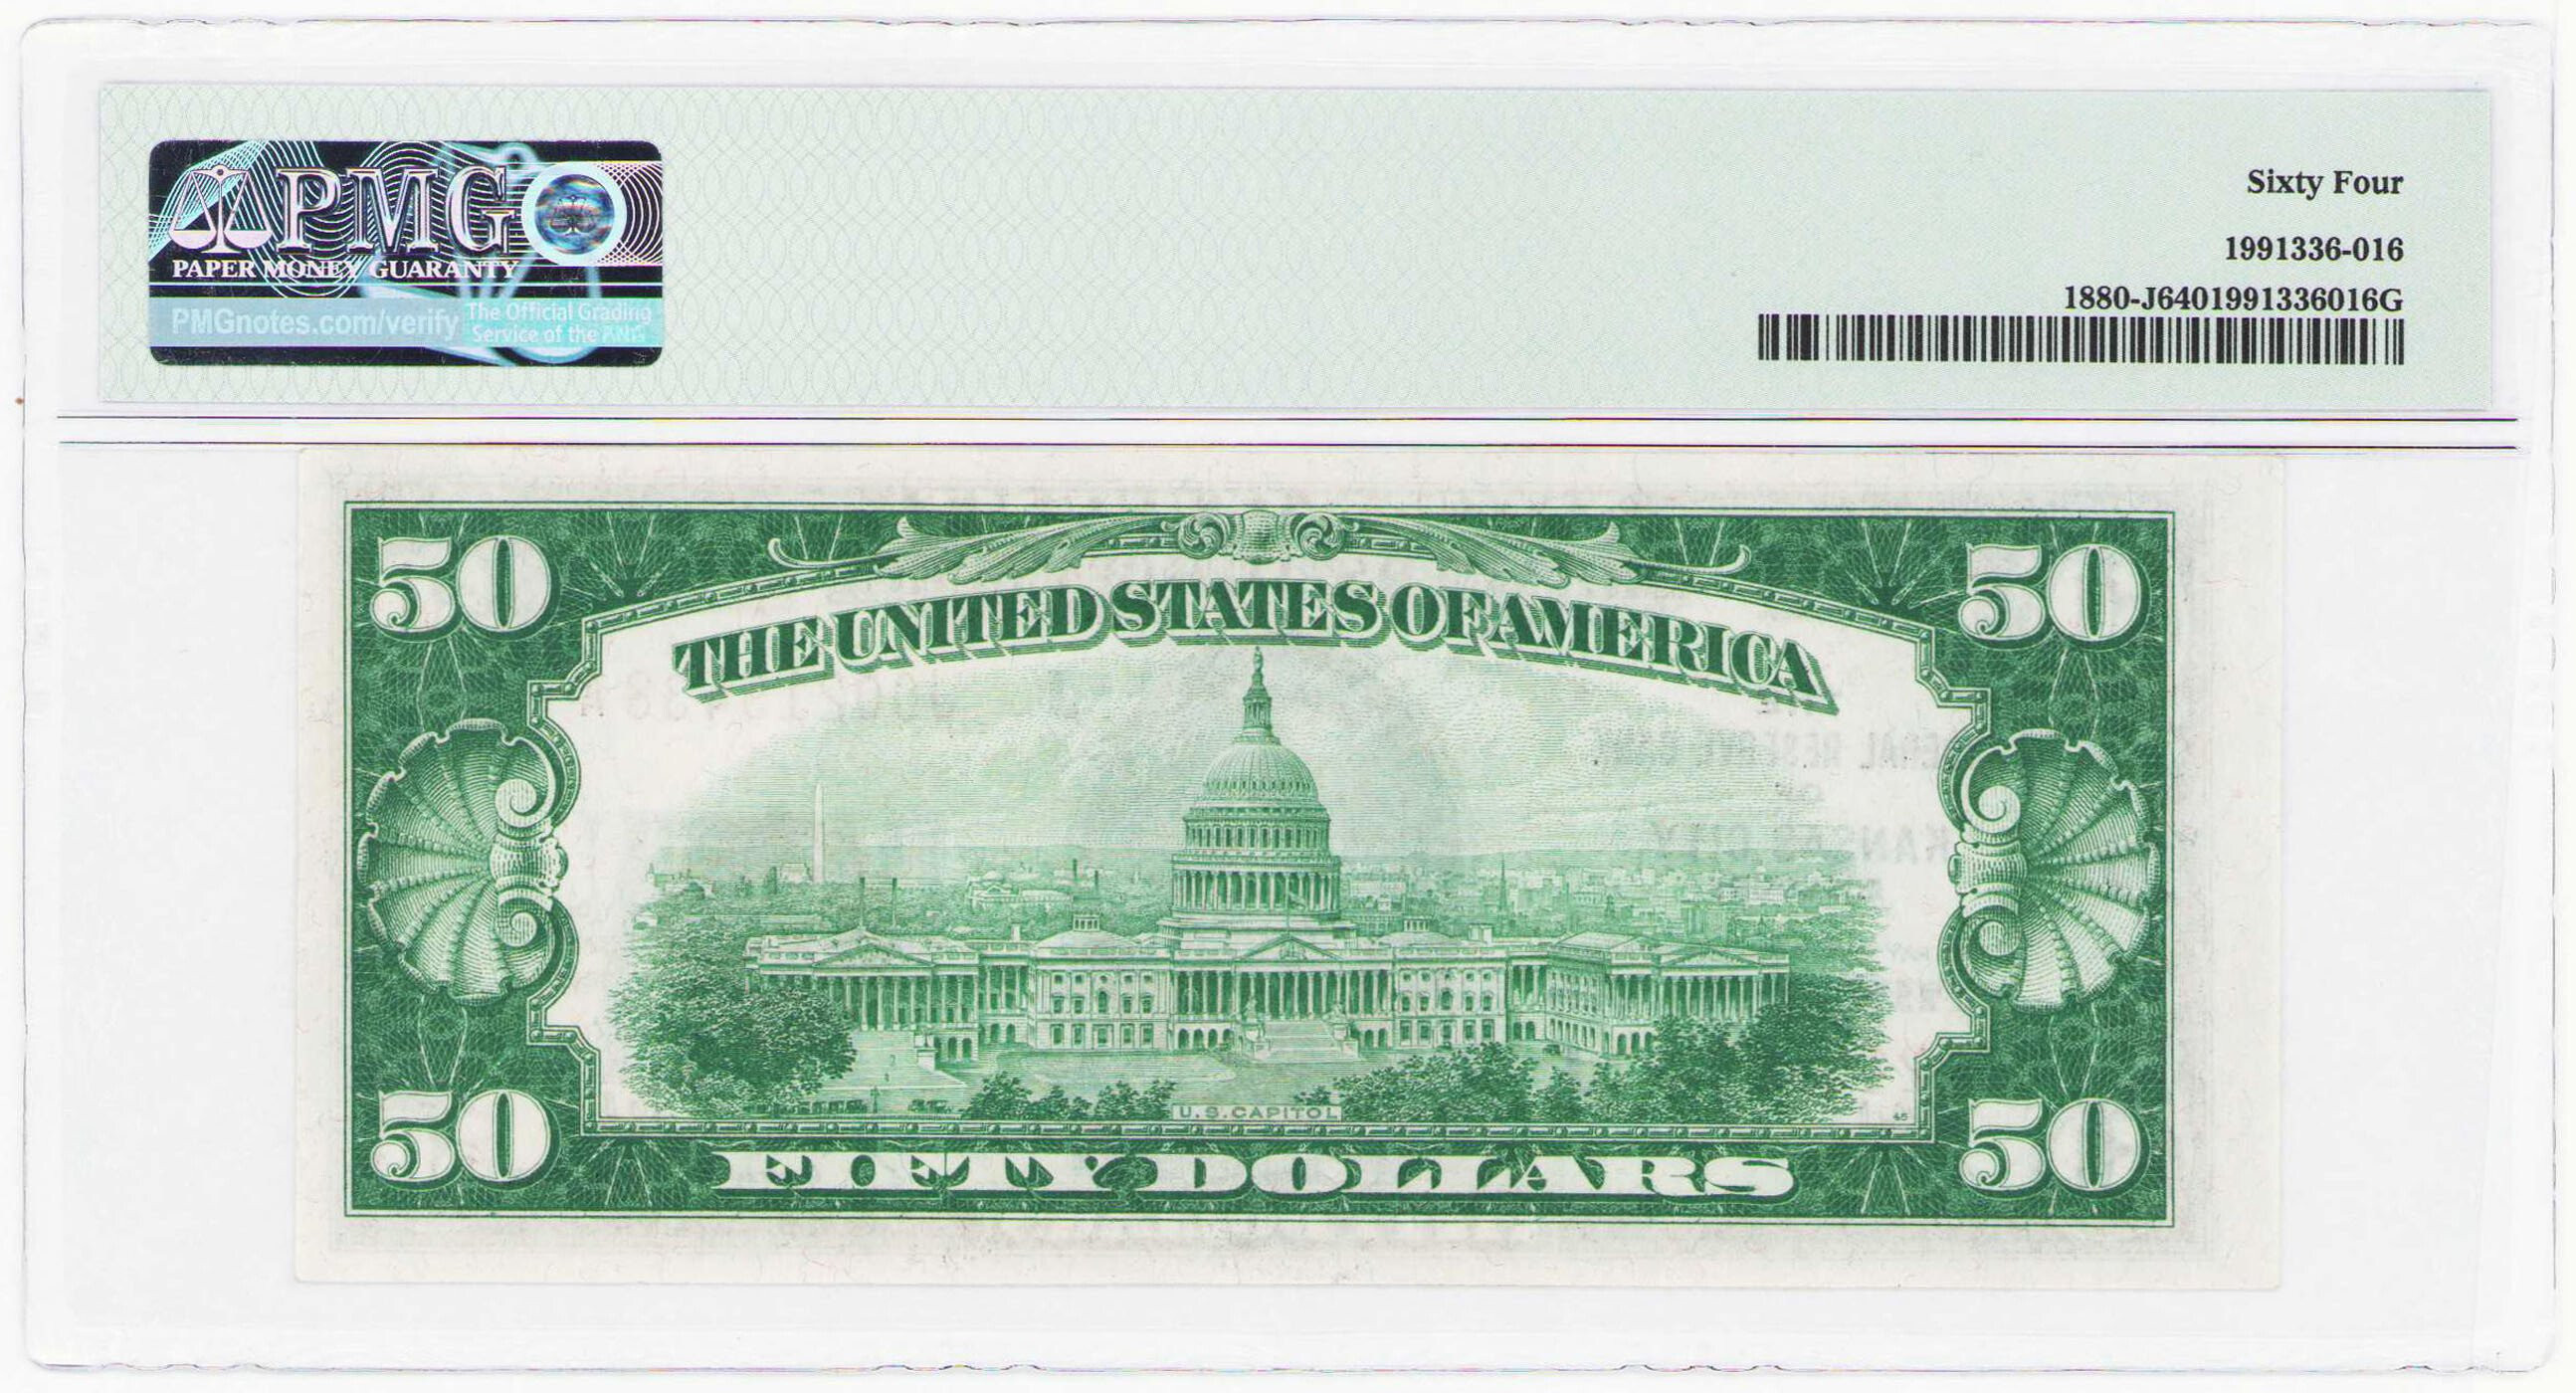 USA. National Bank Notes - New York - The Federal Reserve Bank of New York. 50 dolarów 1929 seria B, PMG 64